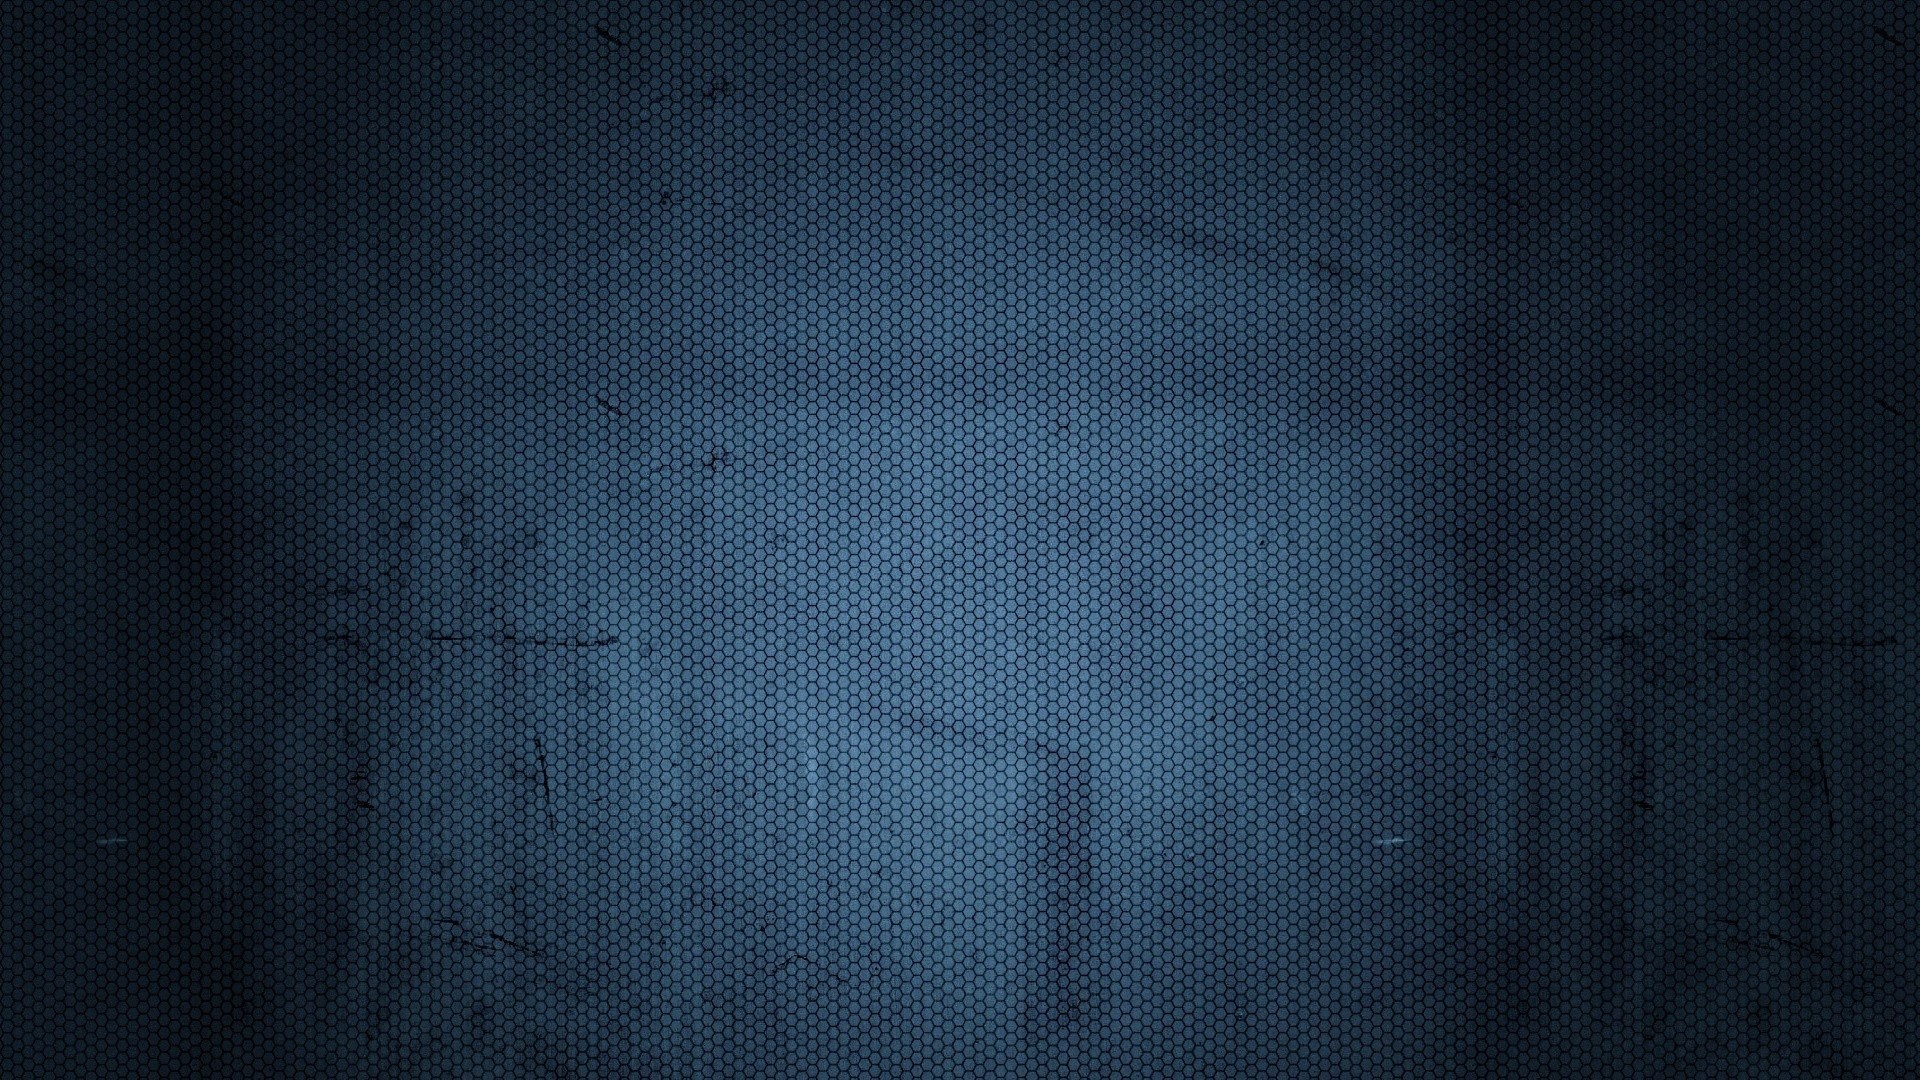 1920x1080 Abstract Backgrounds Blue Dark Textures